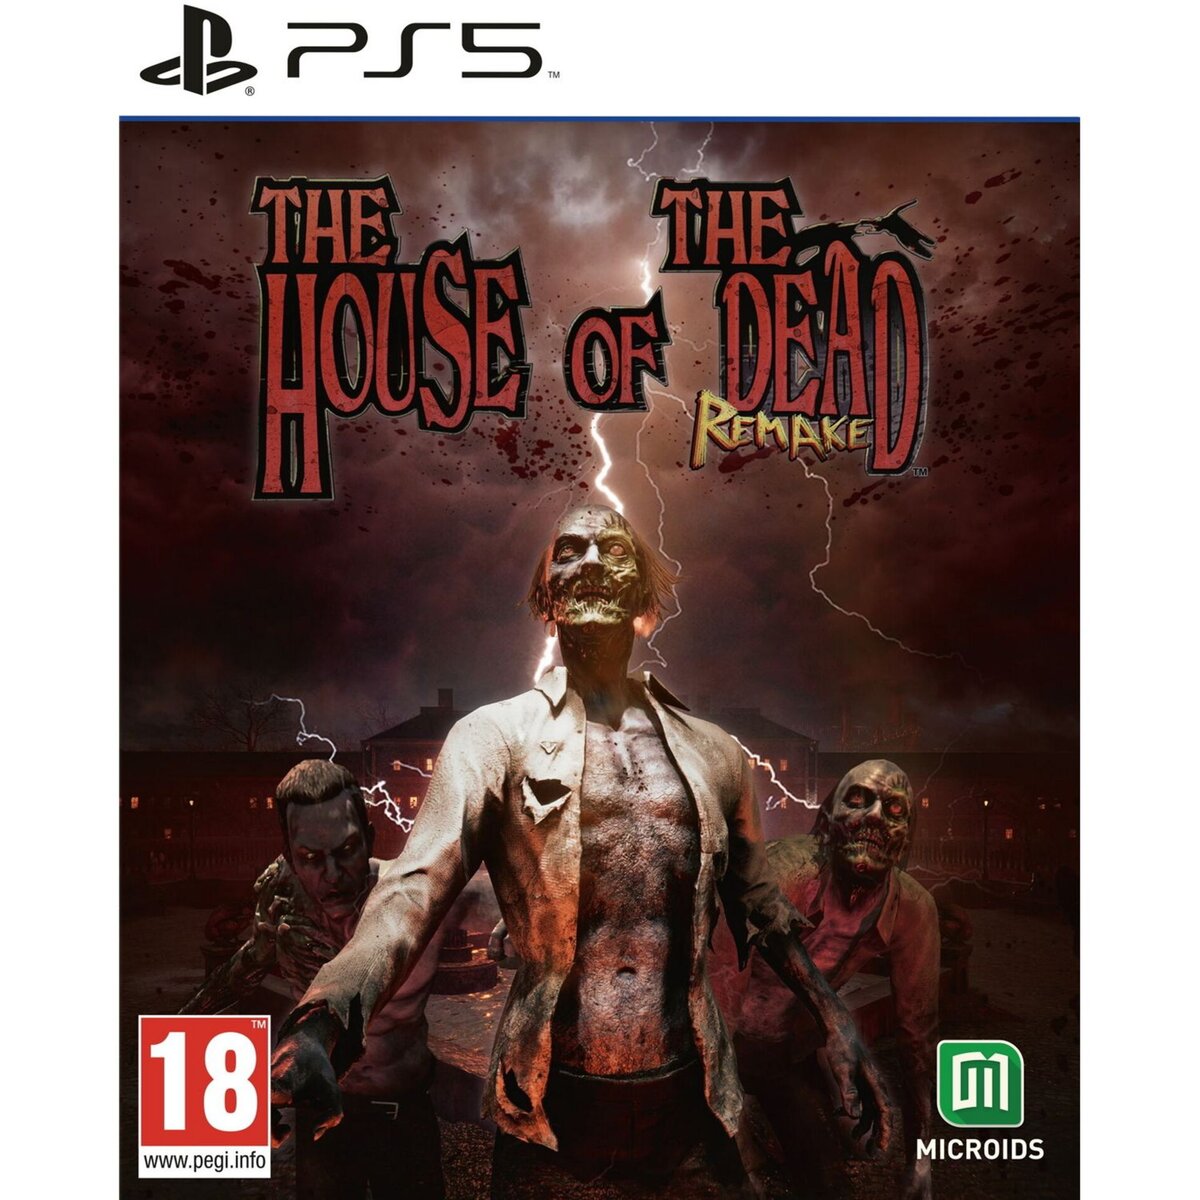 MICROIDS The House of the Dead 1 Remake PS5